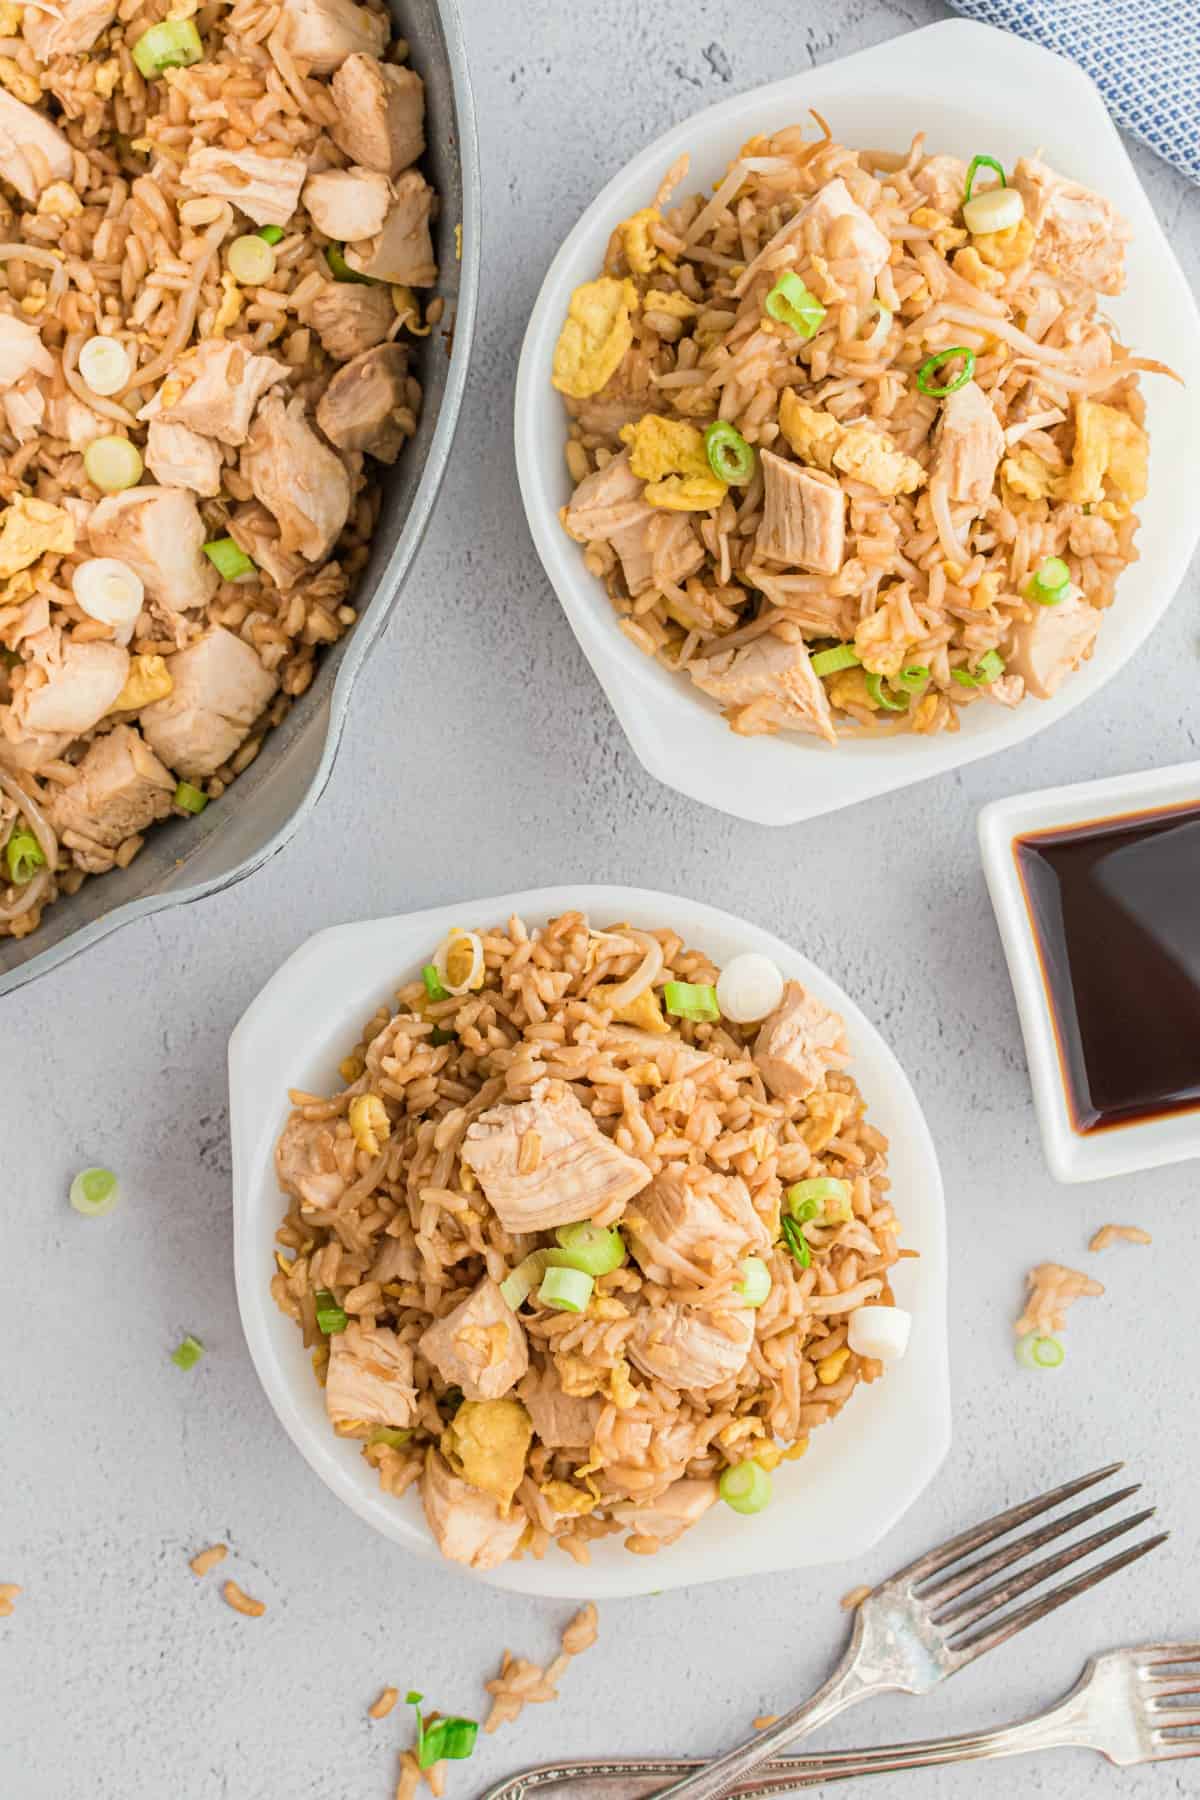 Chicken fried rice served in two white bowls with a side of soy sauce.